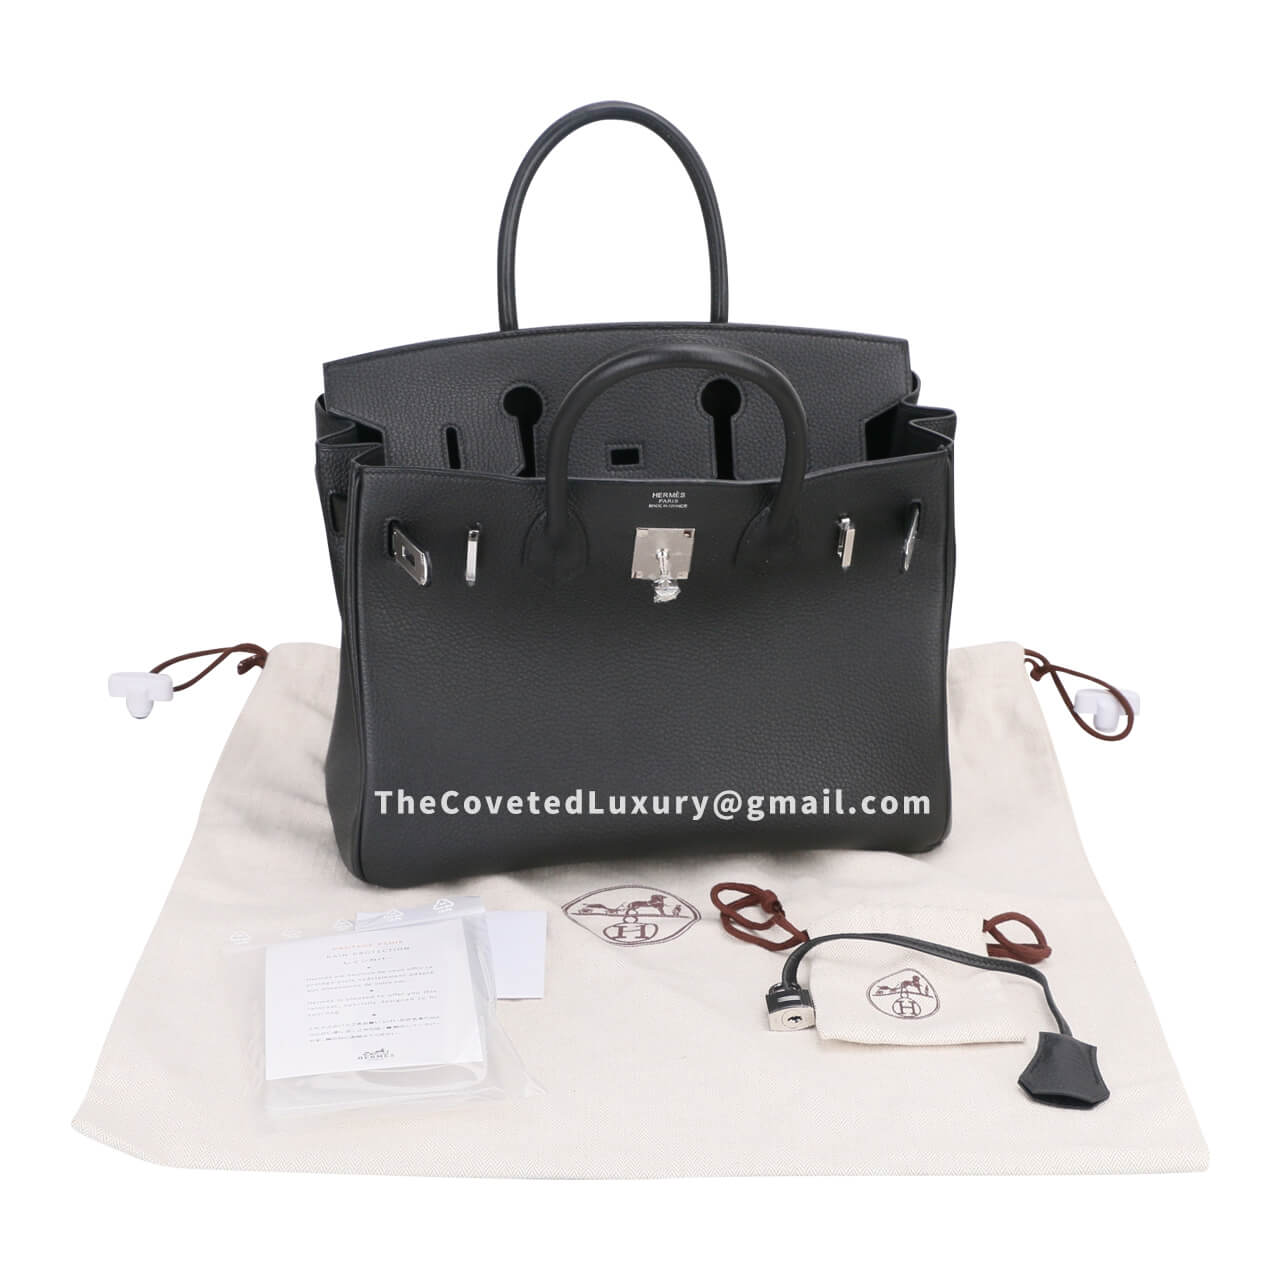 The Best Replica Hermes Kelly Ado handbags Discount Price Is Waiting For You